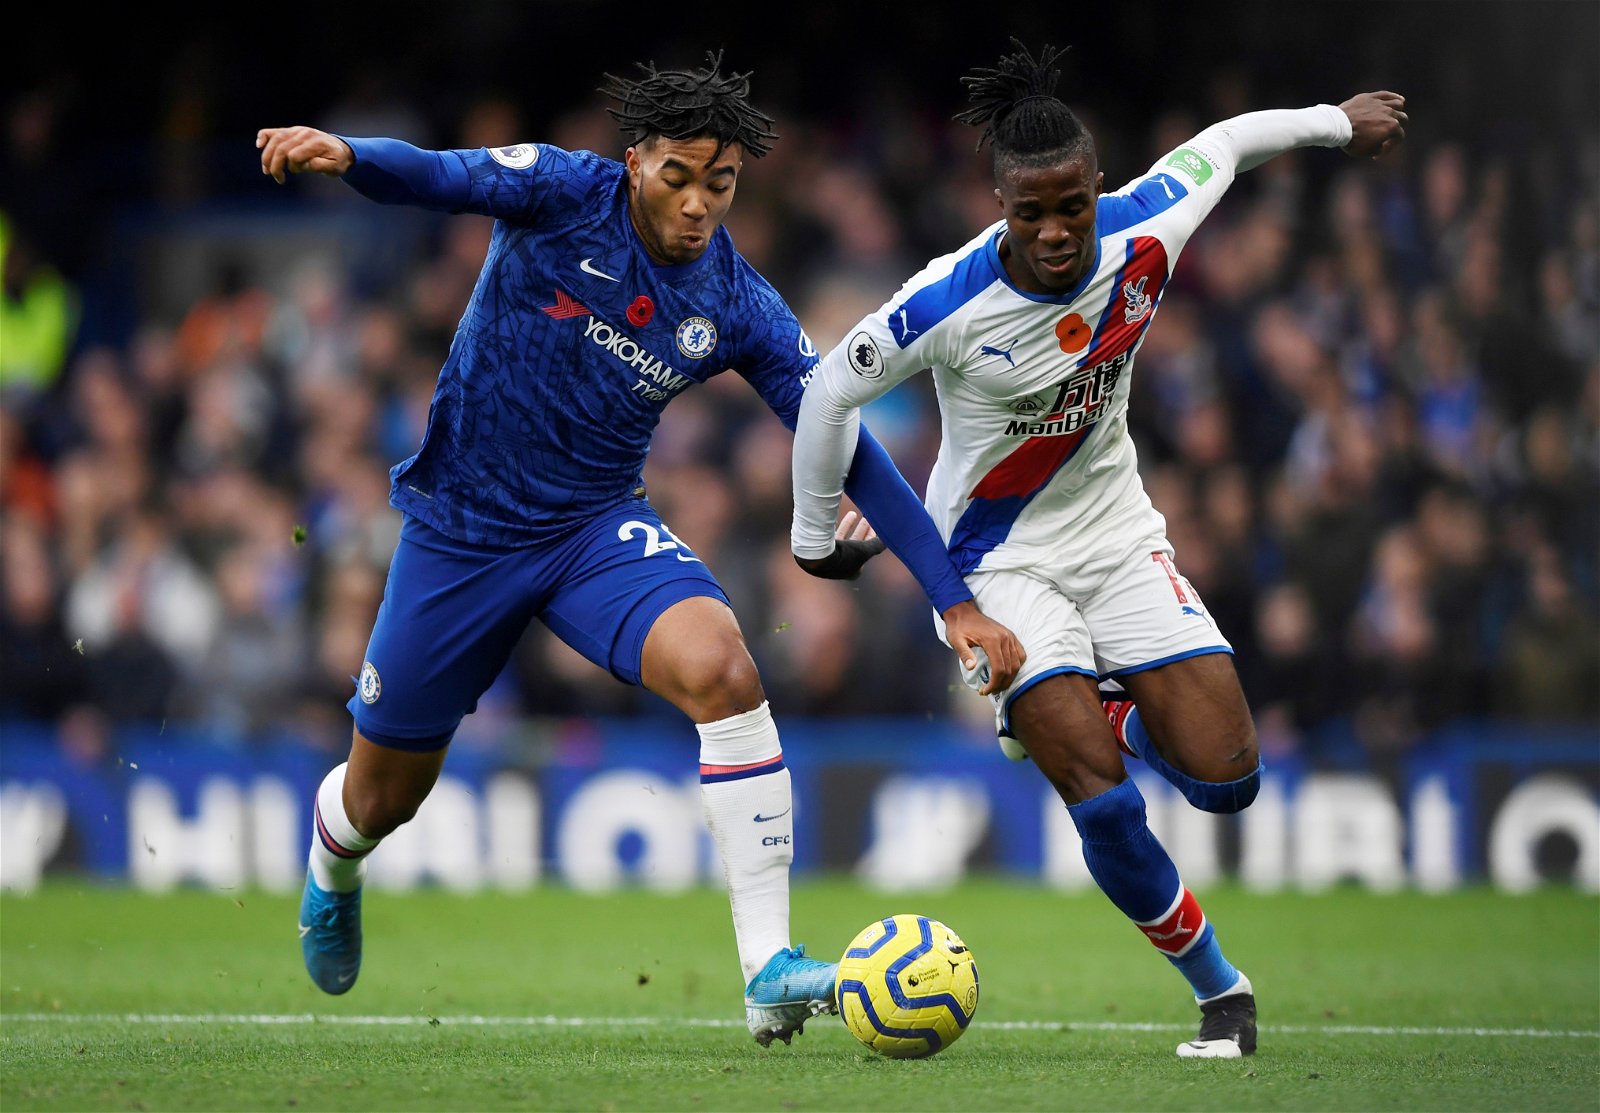 Lampard heaps praise on Chelsea youngster Reece James